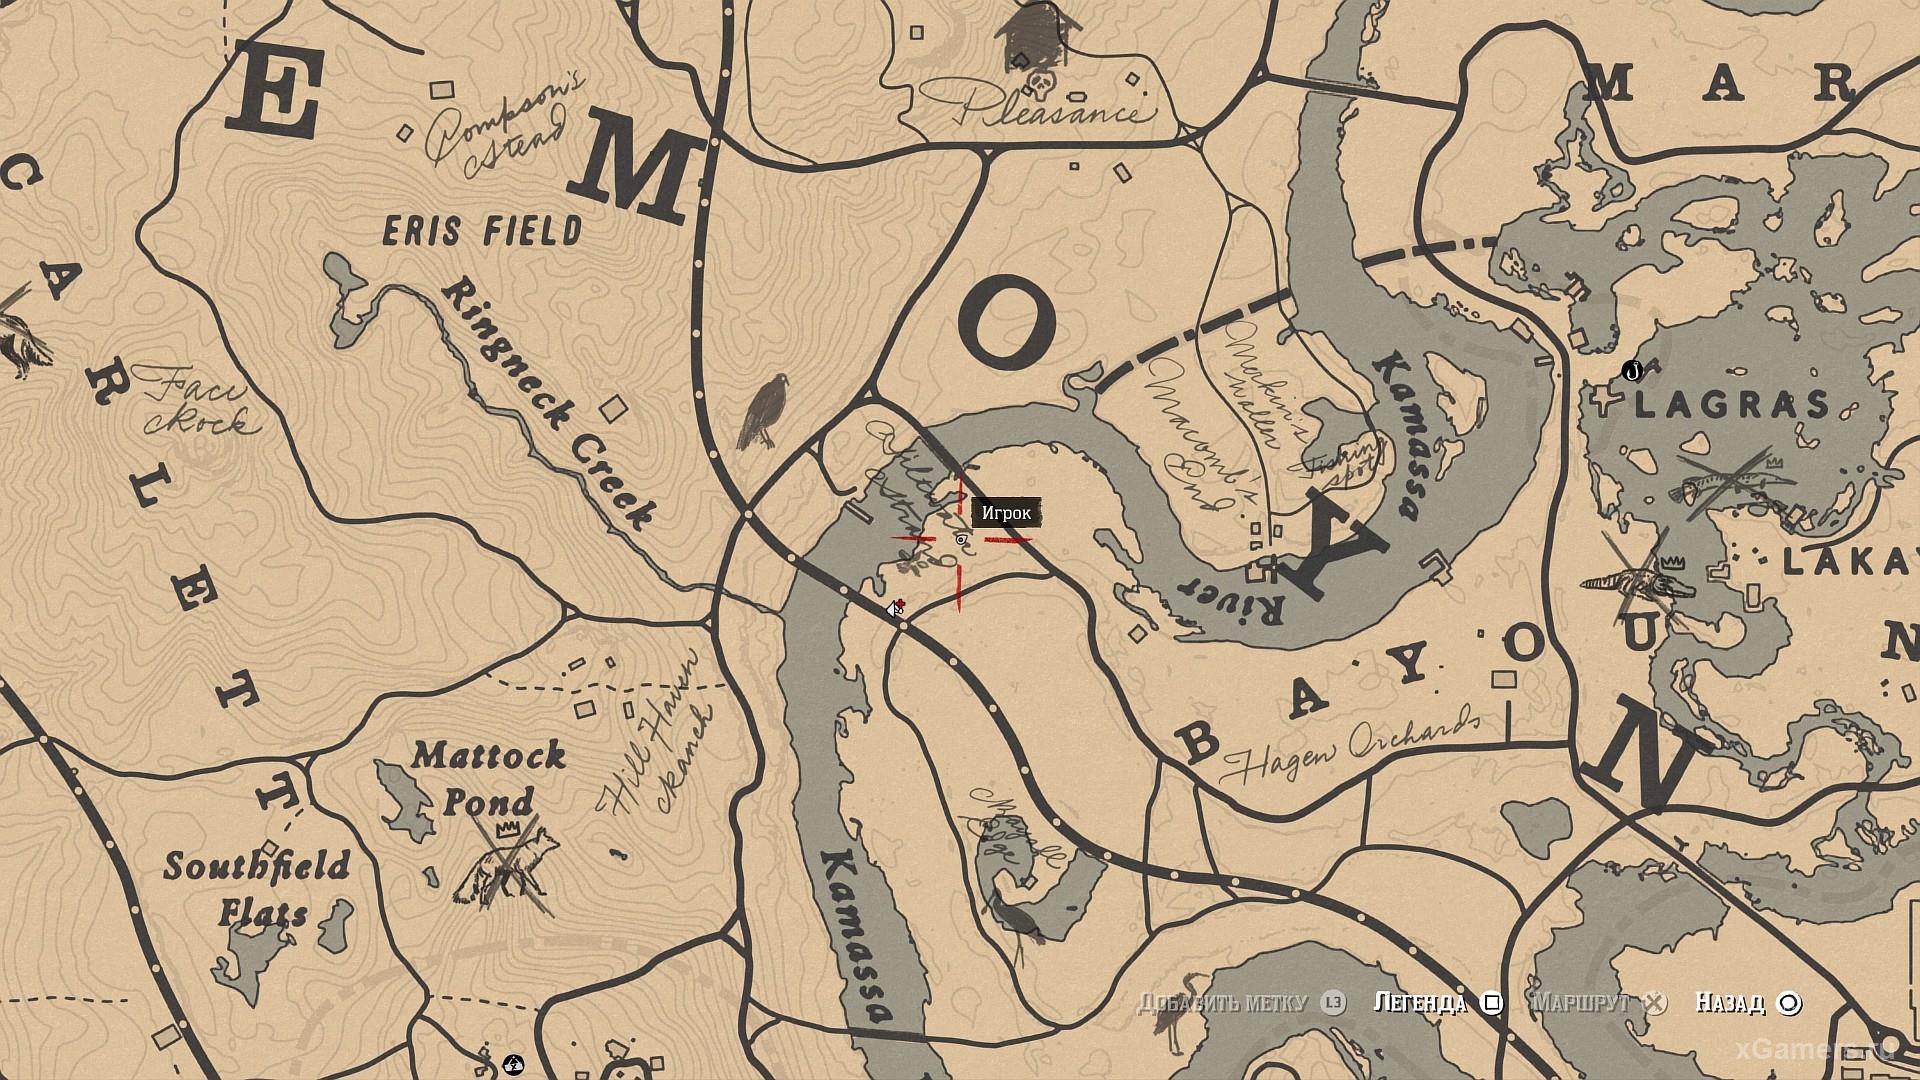 The plants location on the map